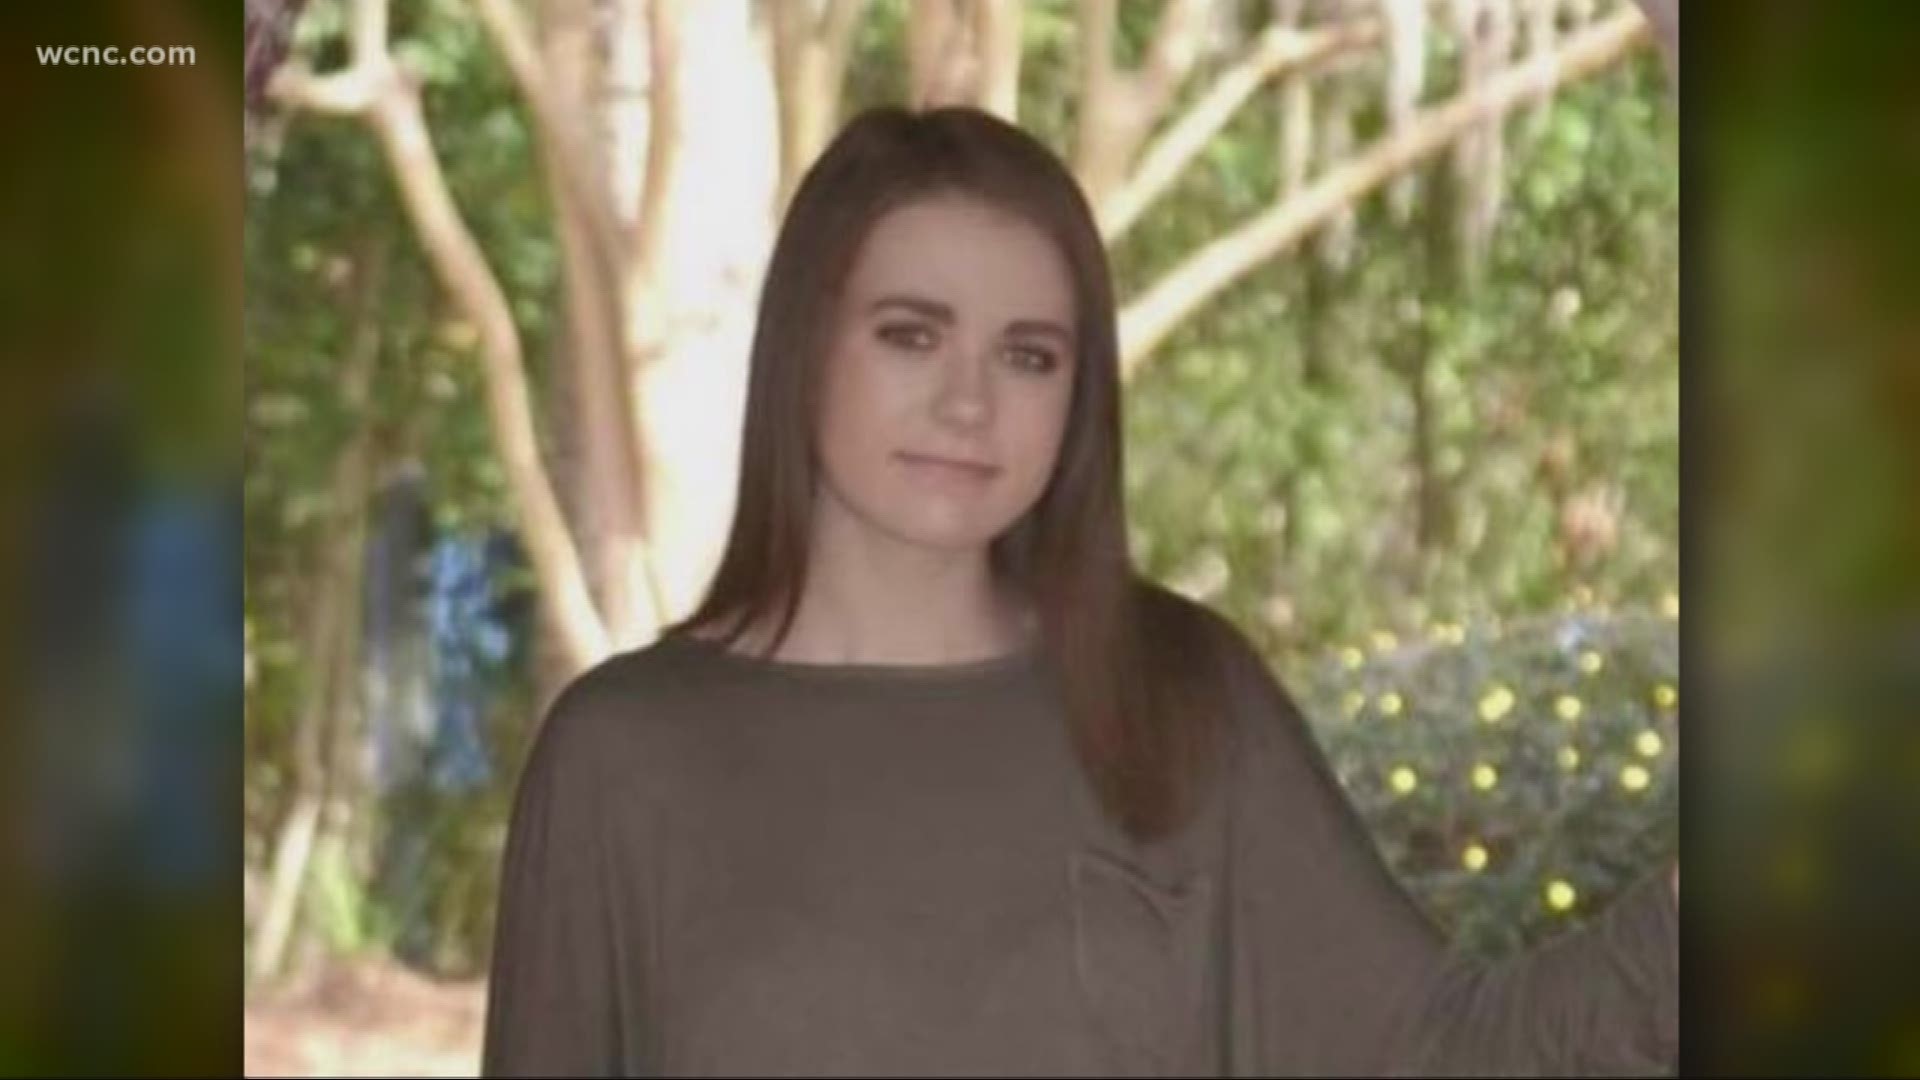 Police in South Carolina is asking for the public's assistance in locating 15-year-old Amber Thurlow. Anyone with information on her is asked to call 911 or 843-719-4465.